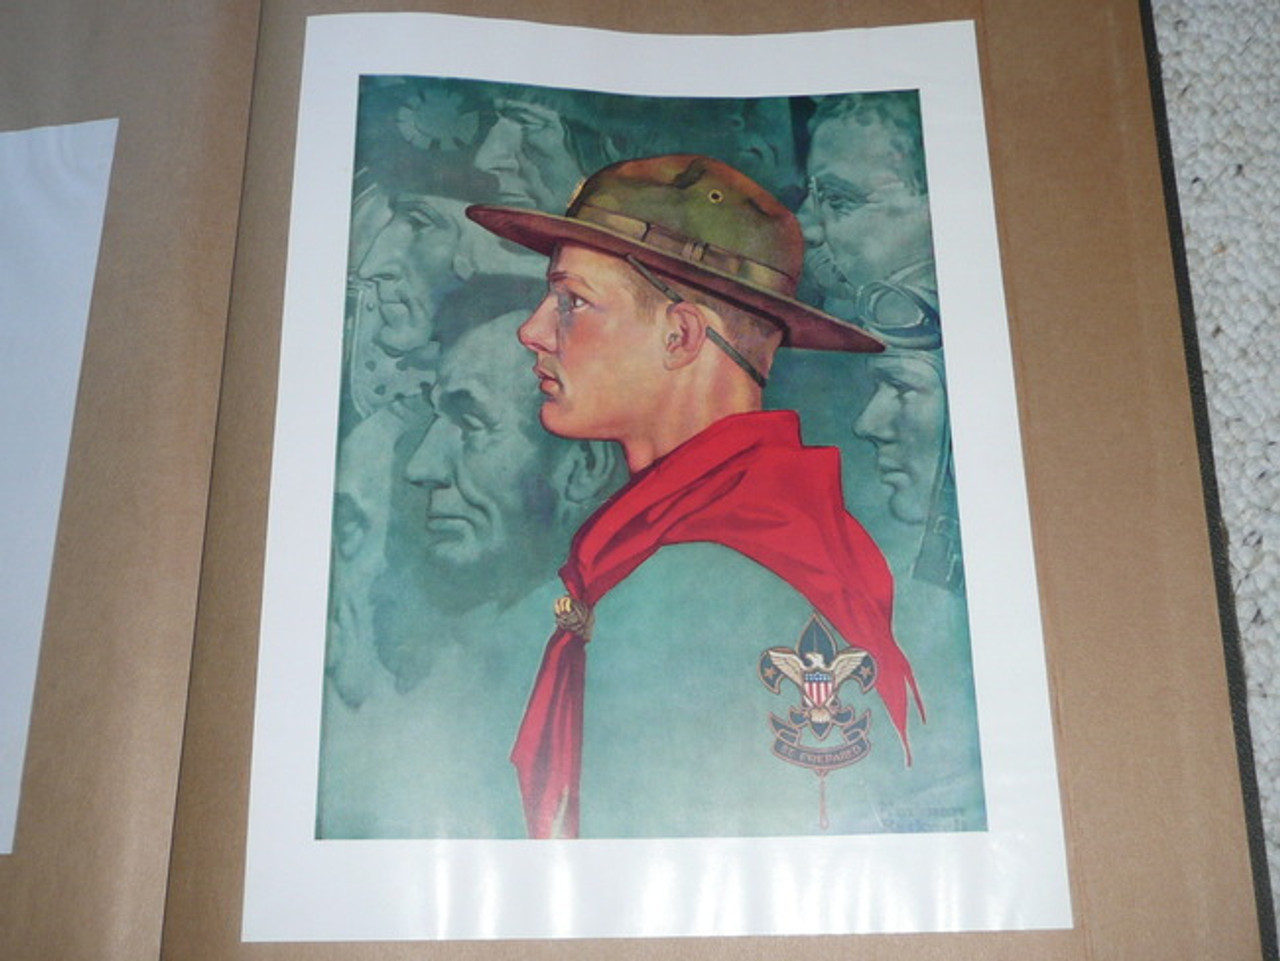 Norman Rockwell Poster of Boy Scout With American Heroes Behind Him, 10"x13", Affixed to Scrapbook Paper